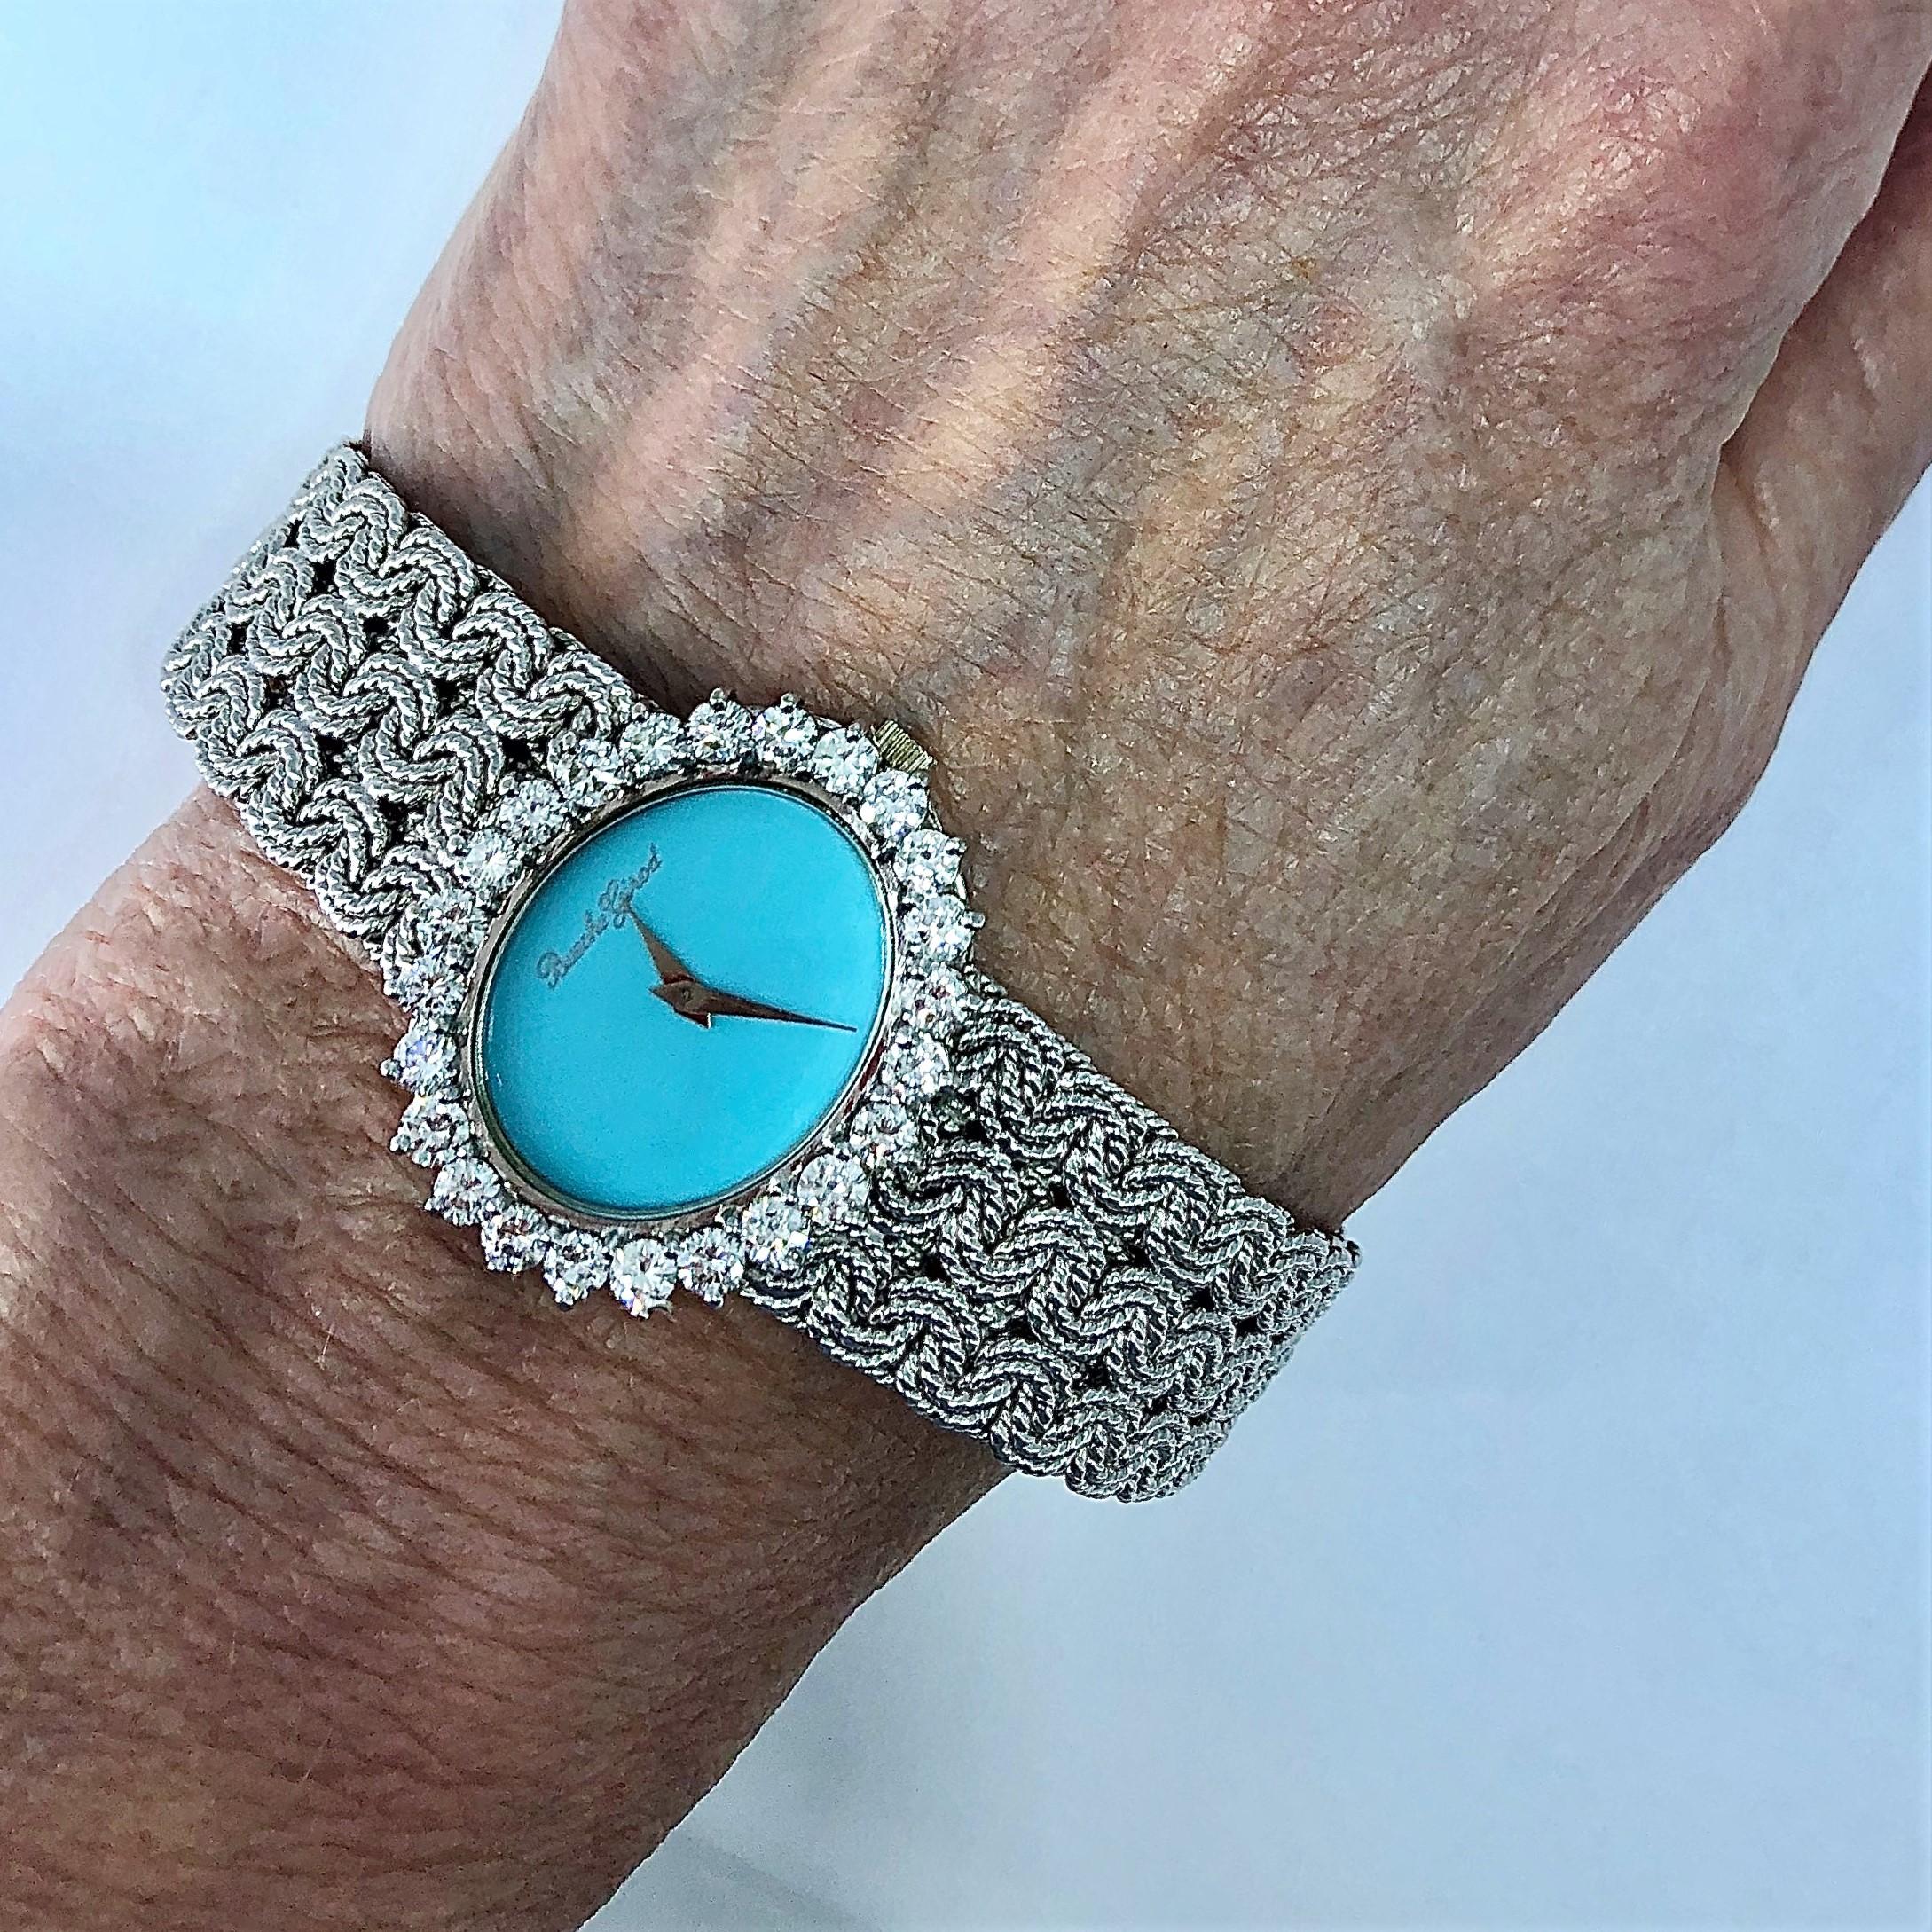 White Gold Ladies Bueche Girod Watch with Turquoise Dial and Large Diamond Bezel 3